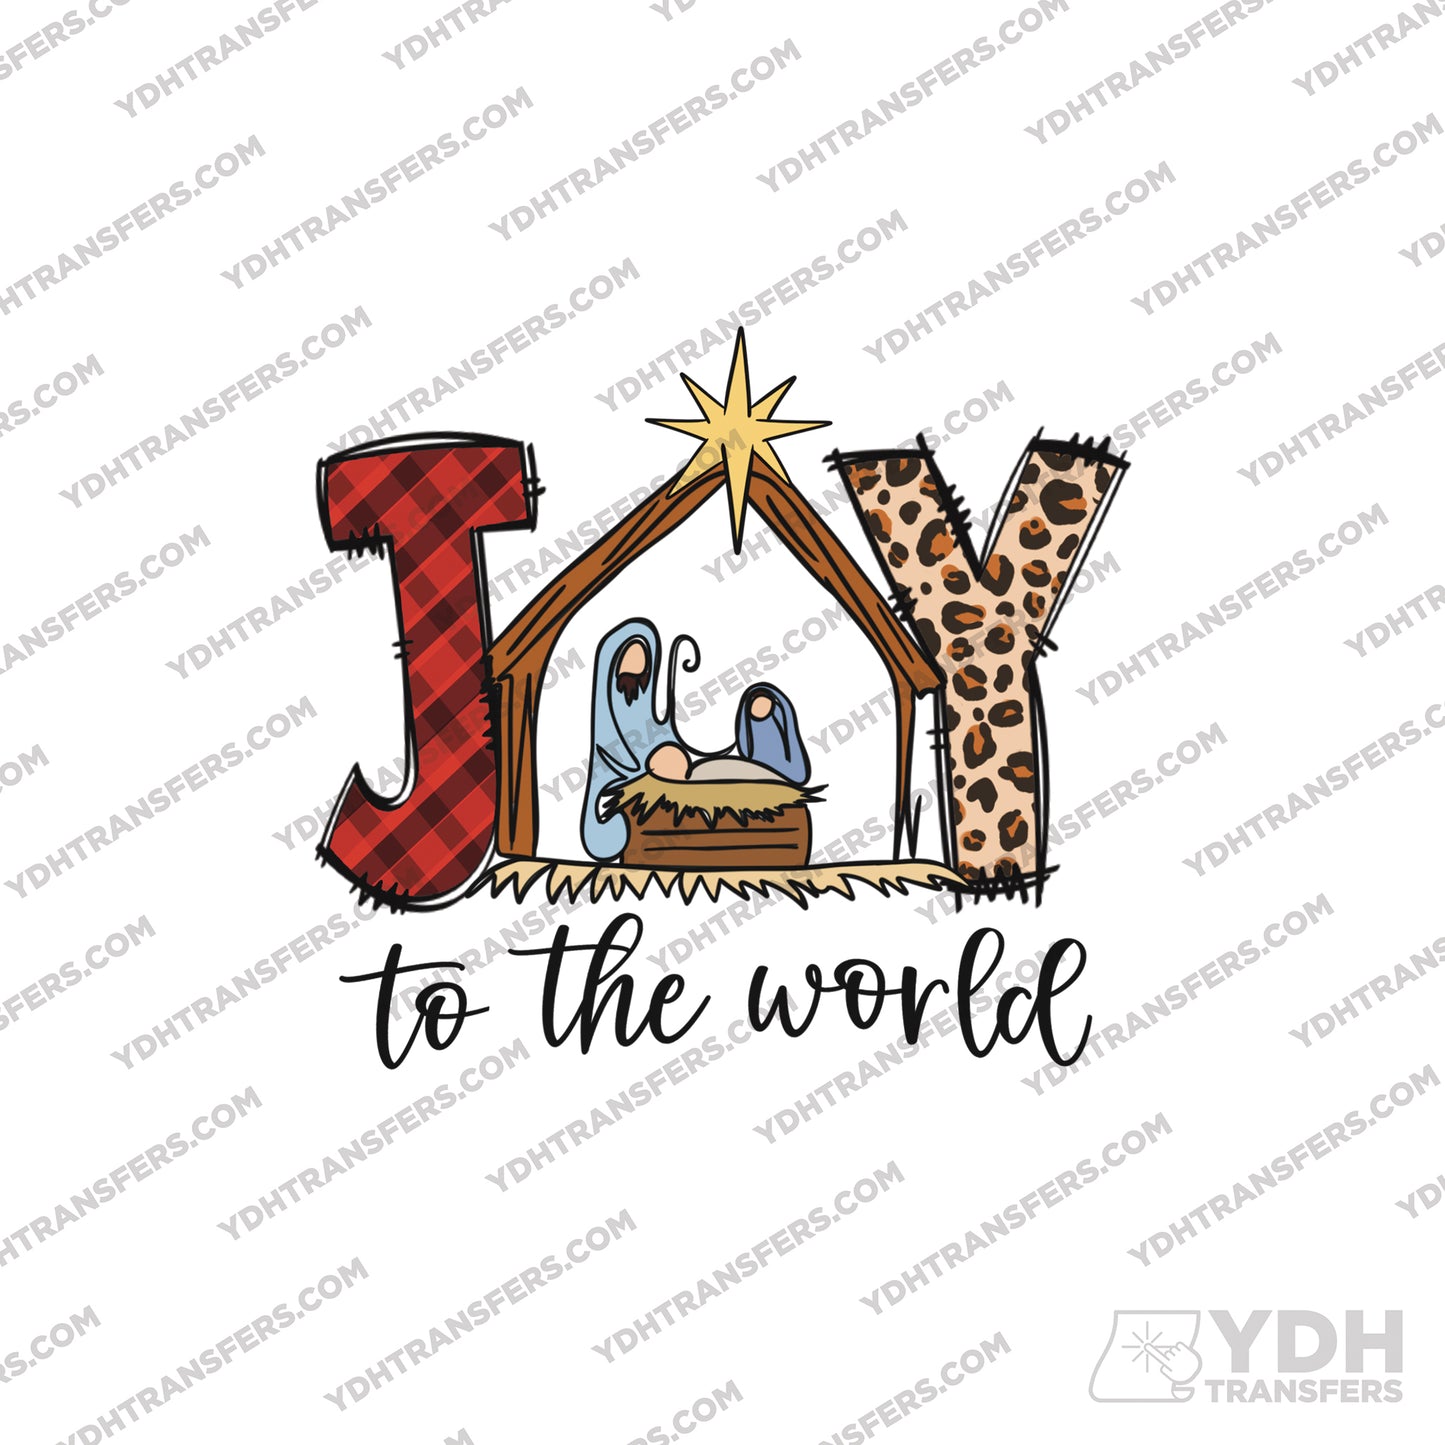 Joy to the World Full Color Transfer